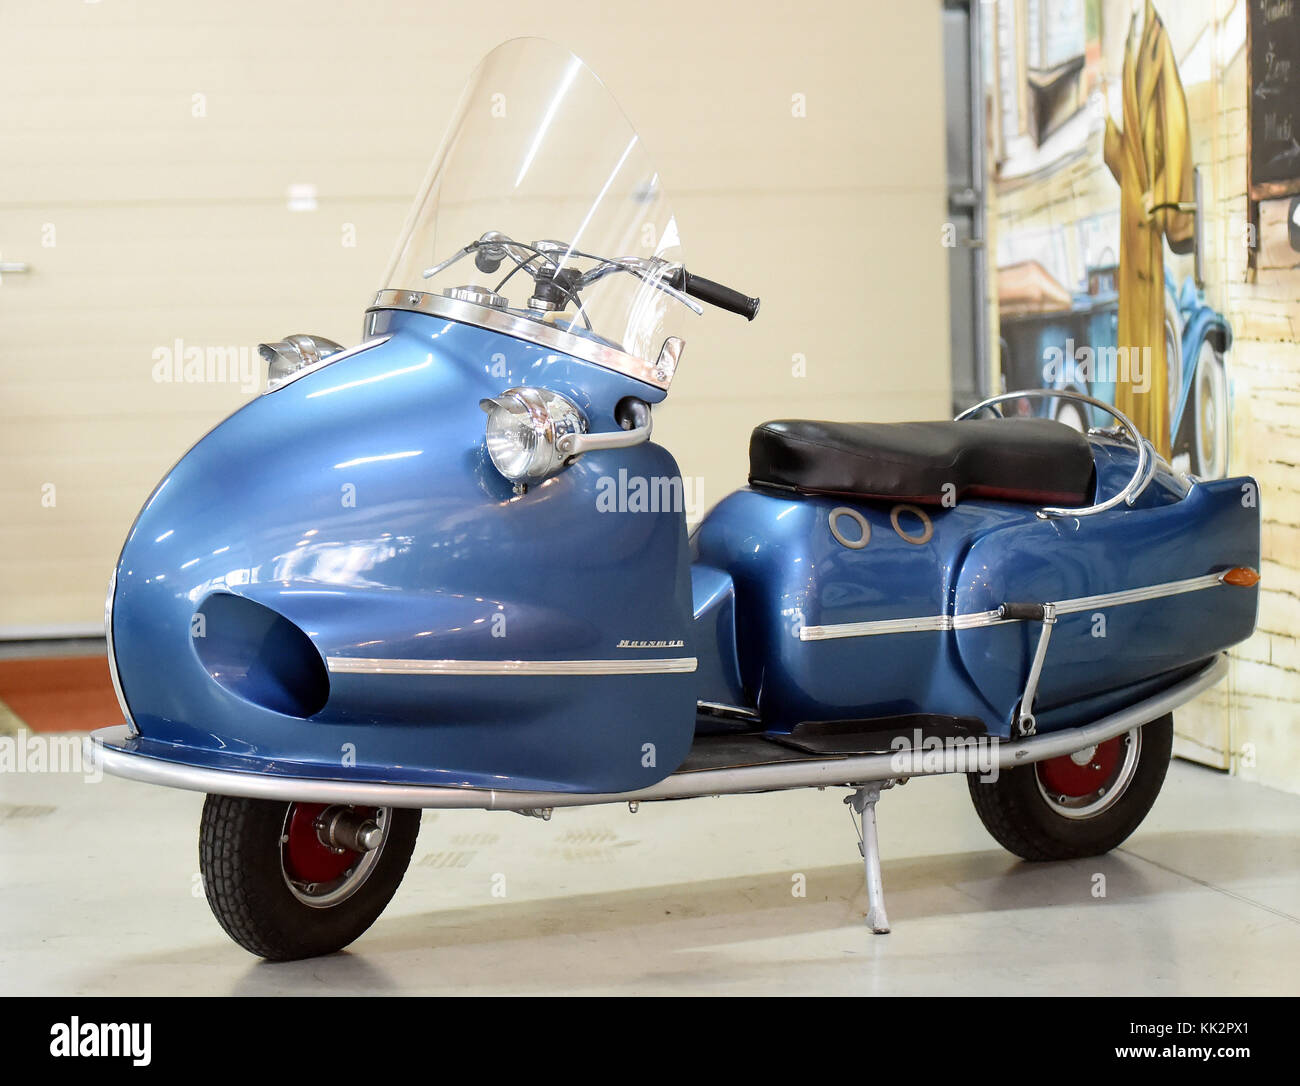 Koprivnice, Czech Republic. 27th Nov, 2017. Czech scooter Hausman from 1947 is seen in the Auto Moto Museum OLD TIMER in Koprivnice, Czech Republic, on November 27, 2017. This scooter exists only in the single specimen. Credit: Jaroslav Ozana/CTK Photo/Alamy Live News Stock Photo